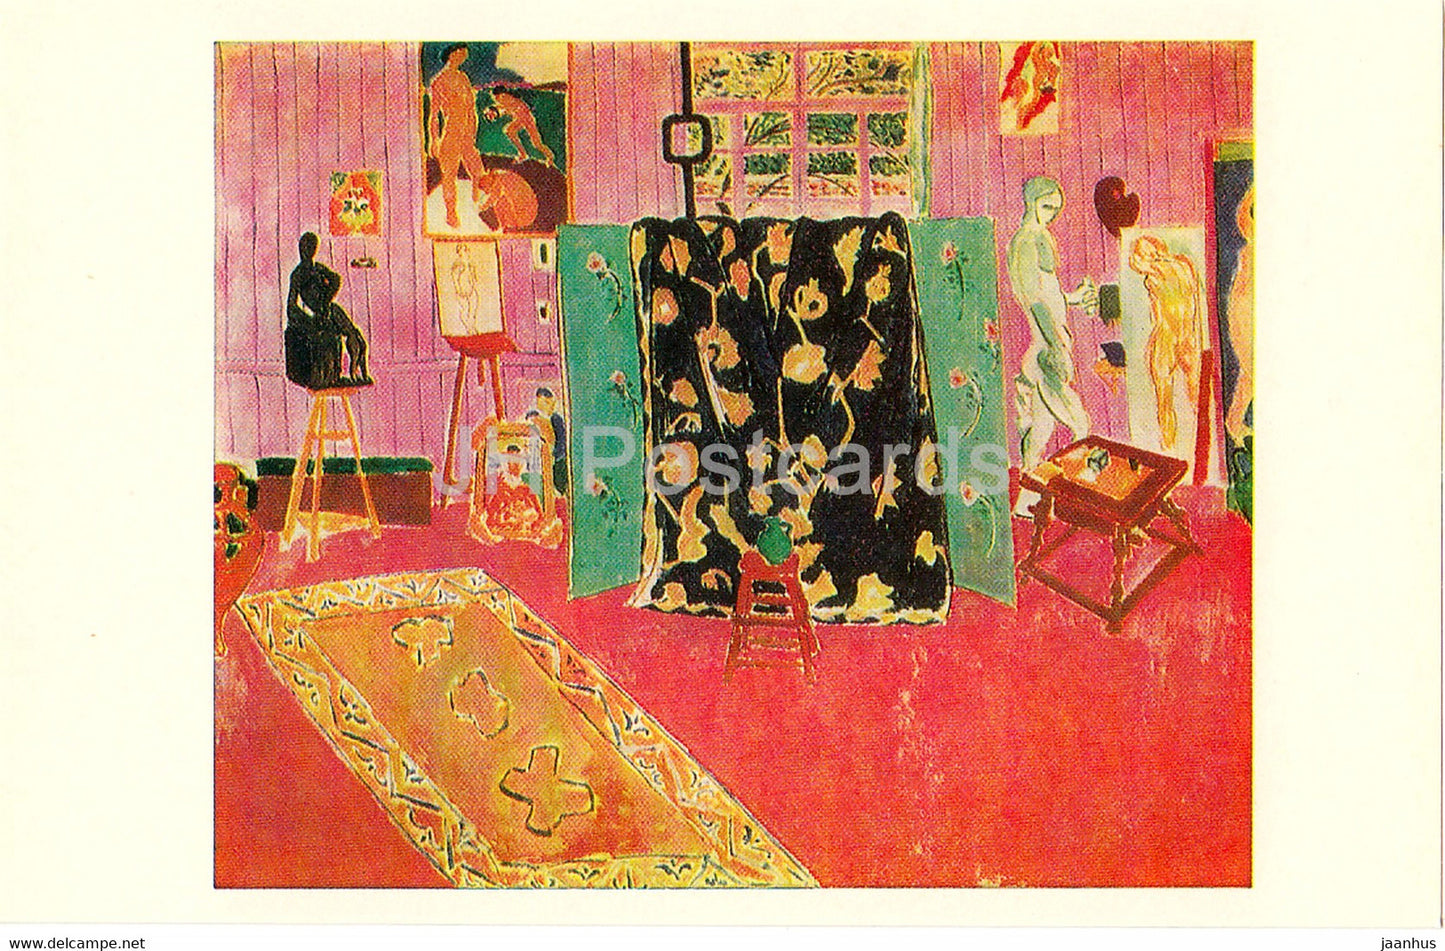 painting by Henri Matisse - The Artist's Studio - French art - 1980 - Russia USSR - unused - JH Postcards